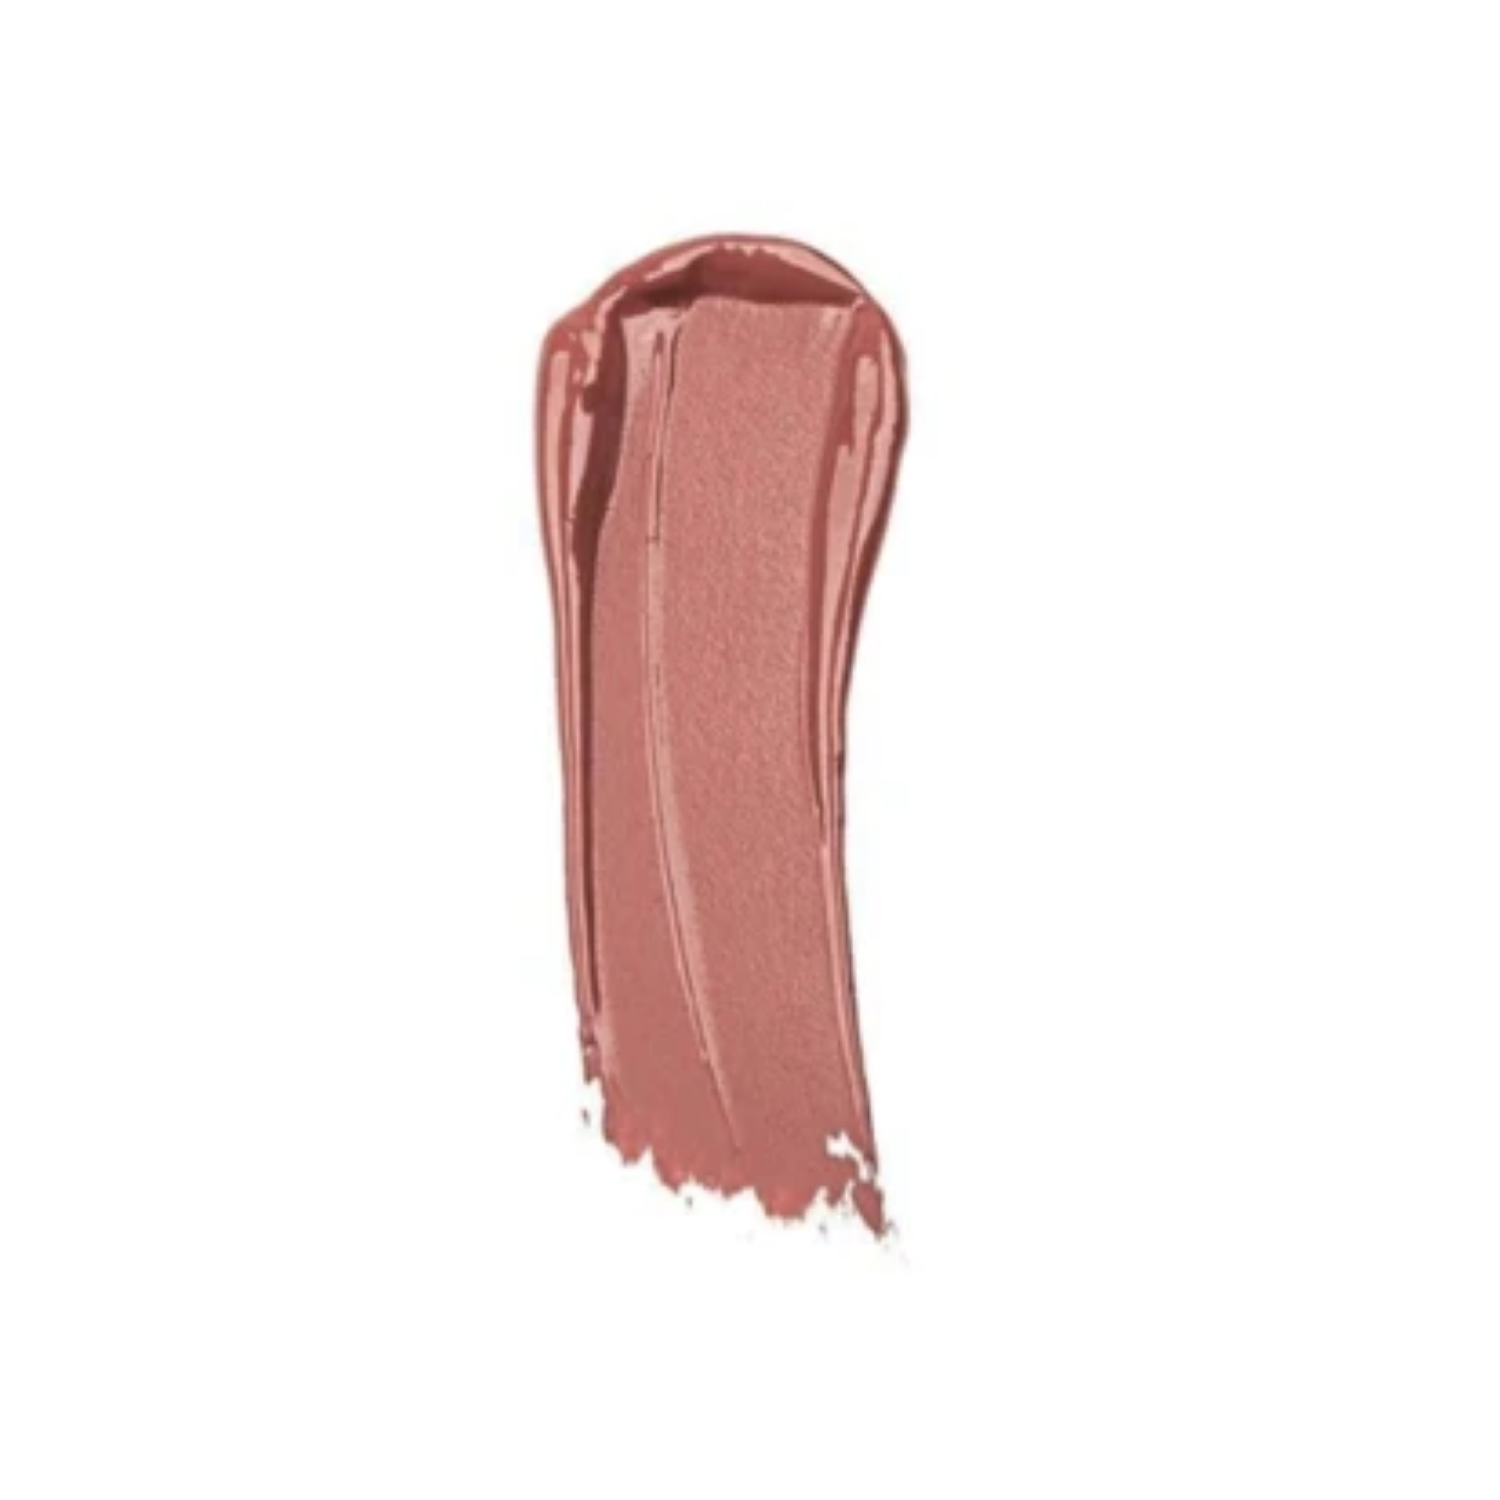 Youngblood Hydrating Liquid Lip Crème / CHIC / SWATCH